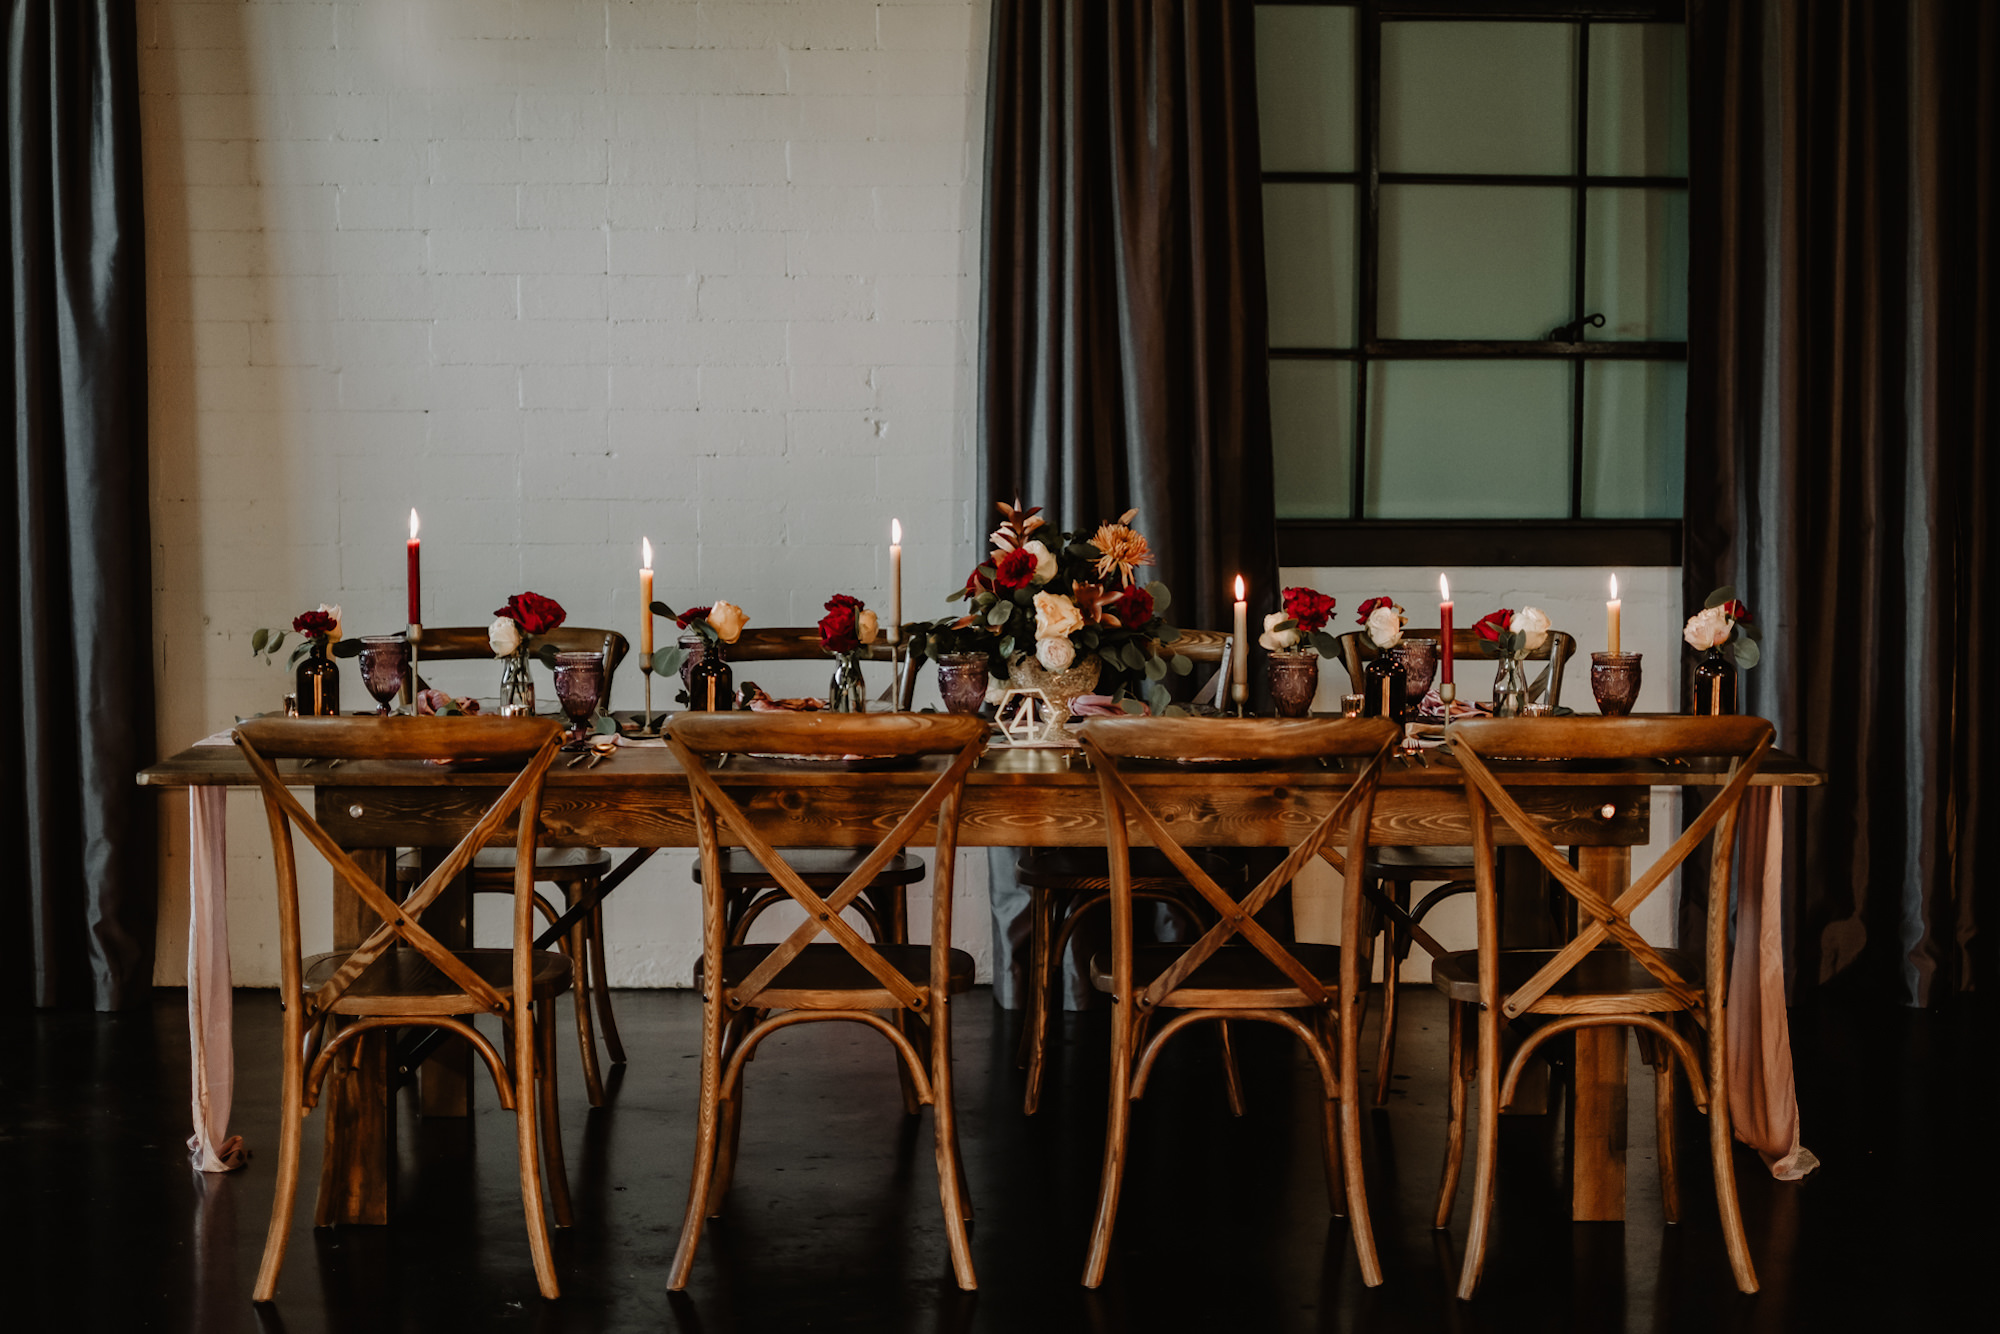 Moody Fall Wedding Reception Ideas | Cross Back Wooden Table Wedding Reception Chairs | Red Burgundy Taper Candles and Low Rose Centerpiece Table Decor Ideas